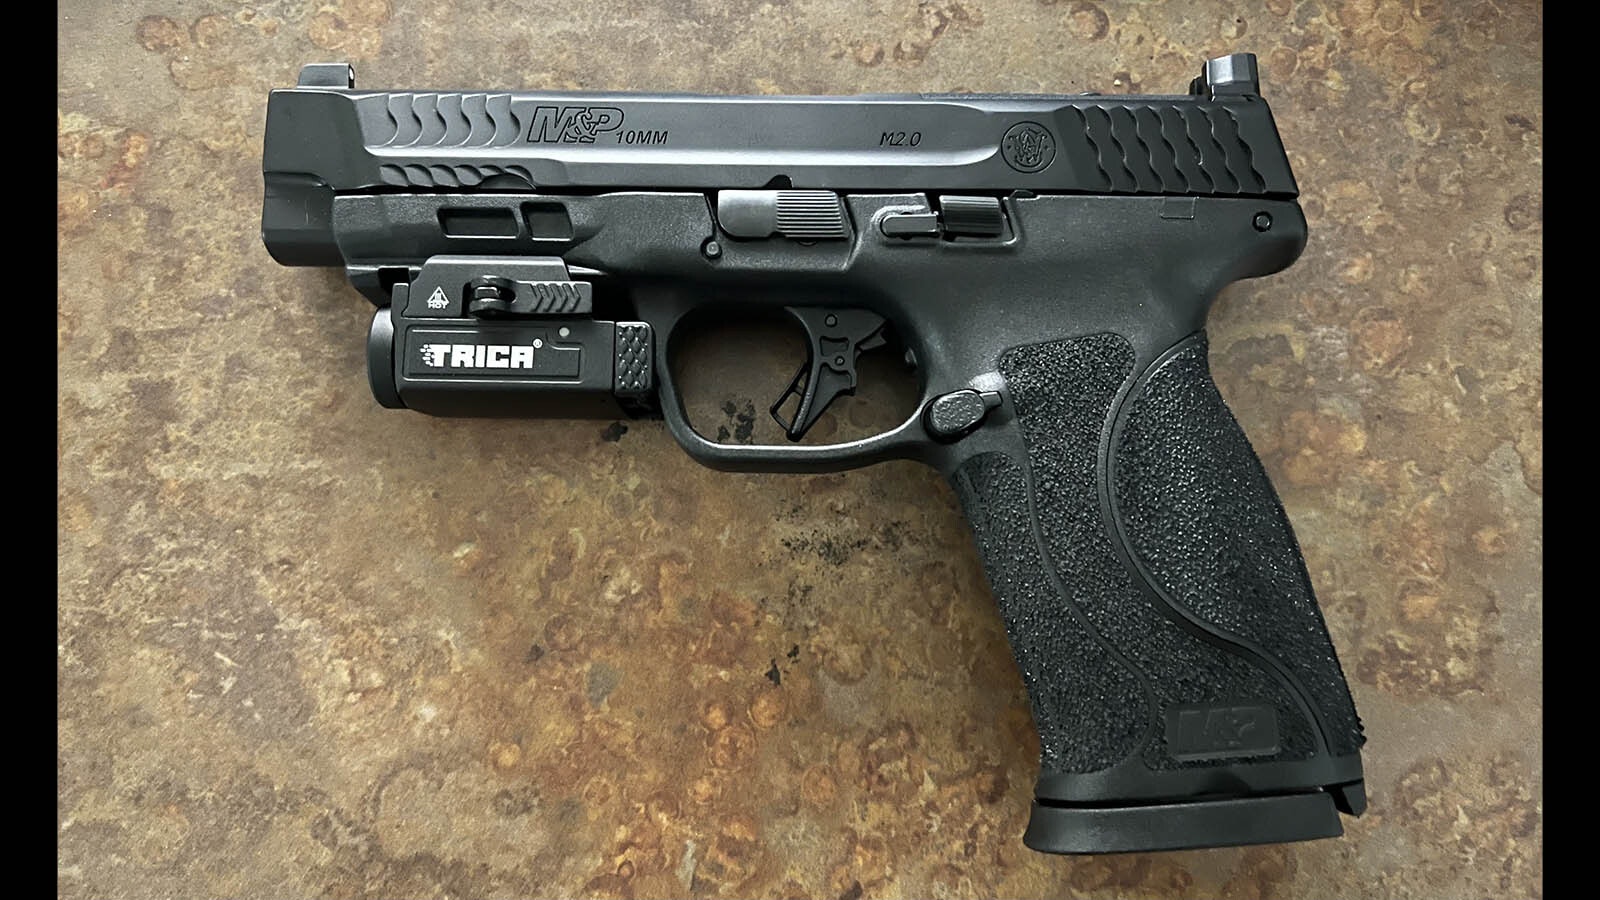 The 10 mm came up several times in online comments as a popular firearm for grizzly protection. Cowboy State Daily Outdoors reporter bought a Smith & Wesson M&P 2.0 chambered for that cartridge a few months ago and can attest that it shoots smoothly and accurately.